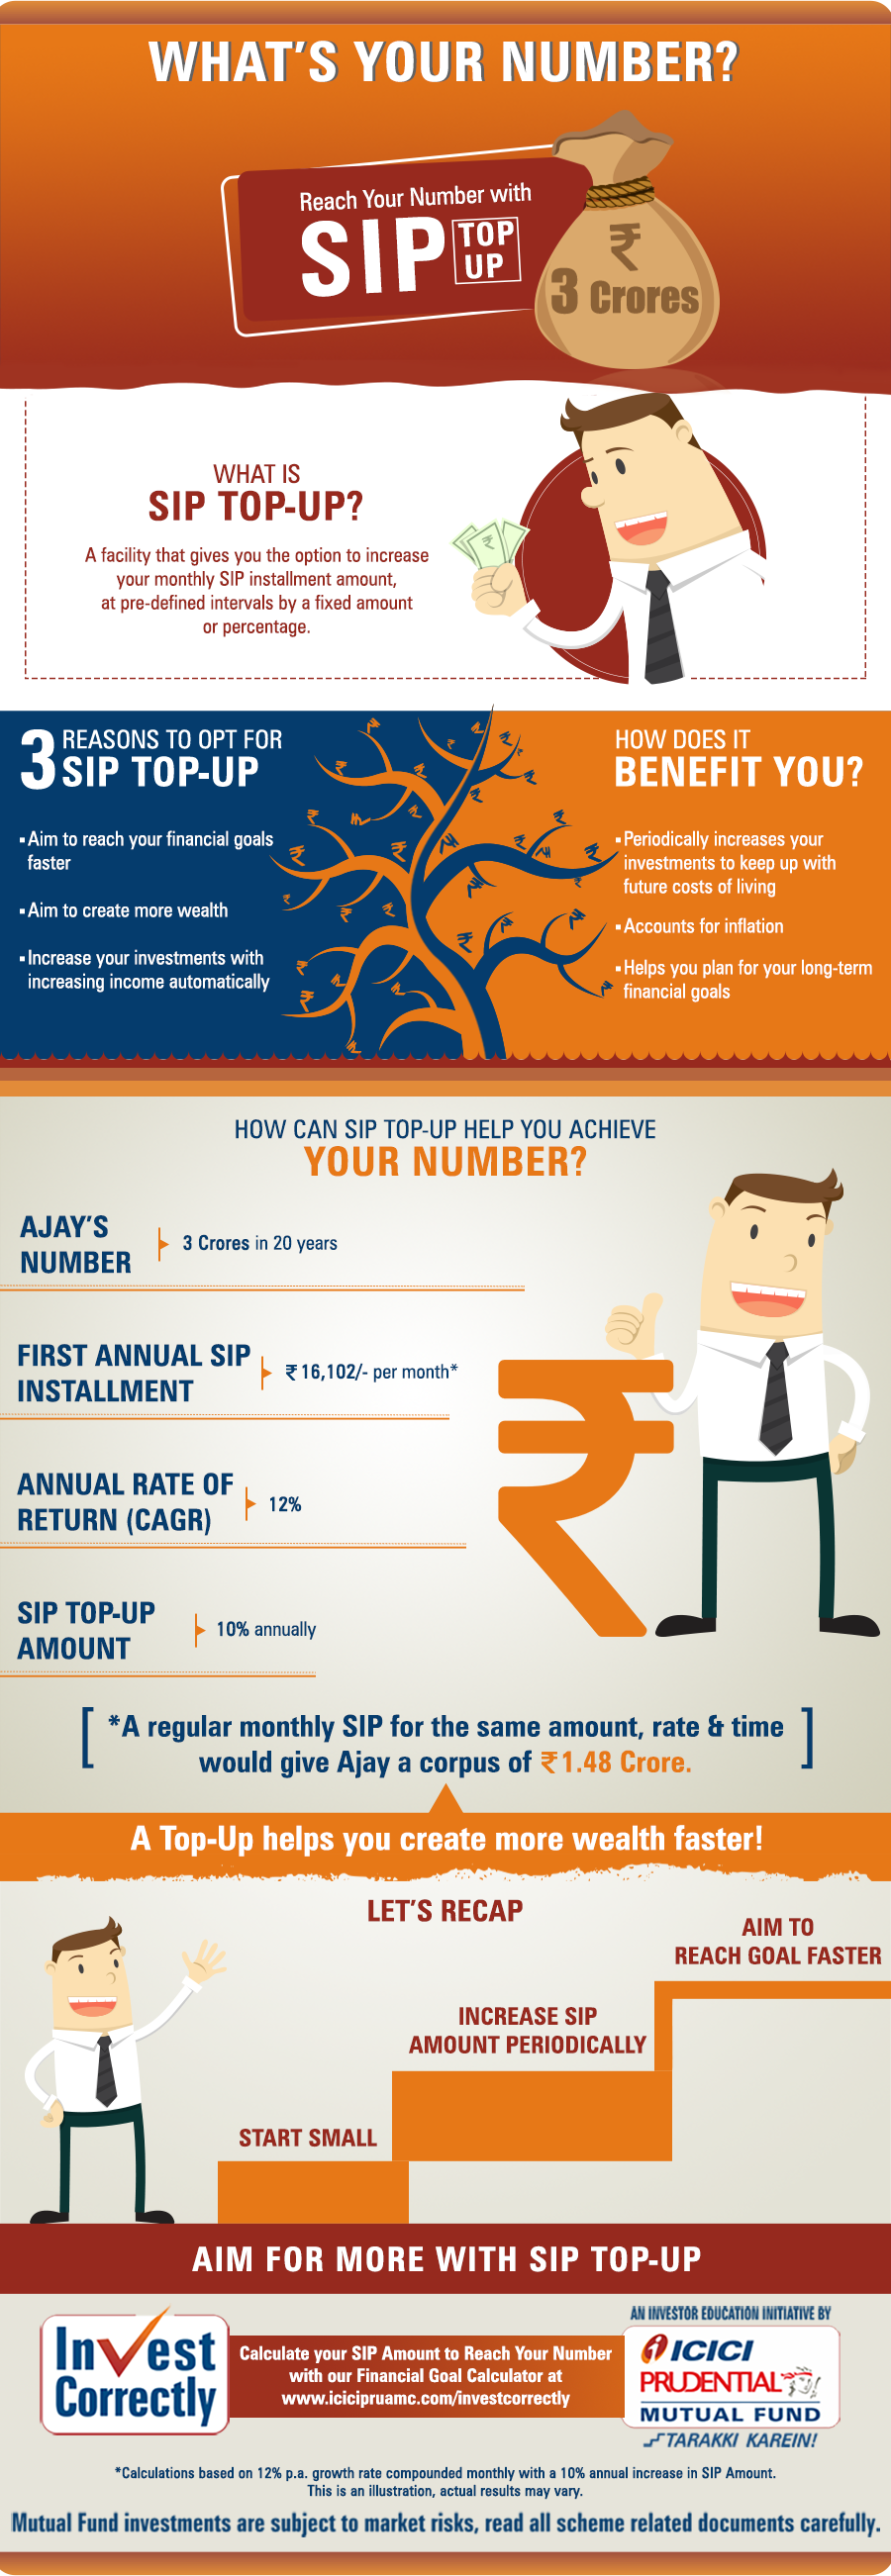 Whats-Your-Number-SIP-Top-Up-Infographic